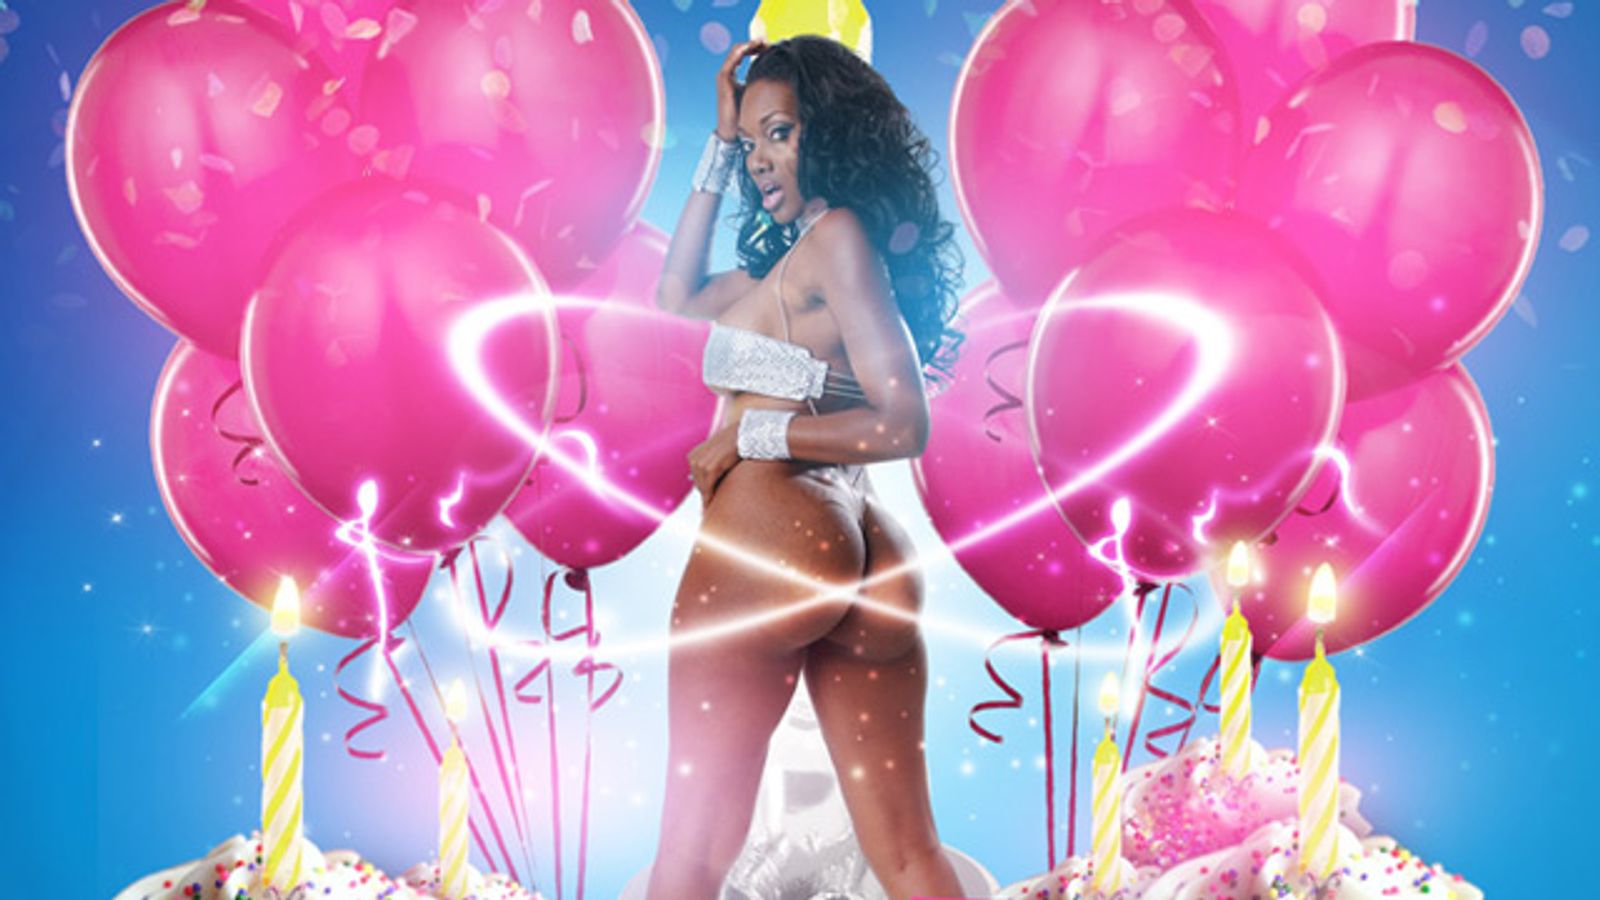 Nyomi Banxxx Hoops It Up on Her Birthday